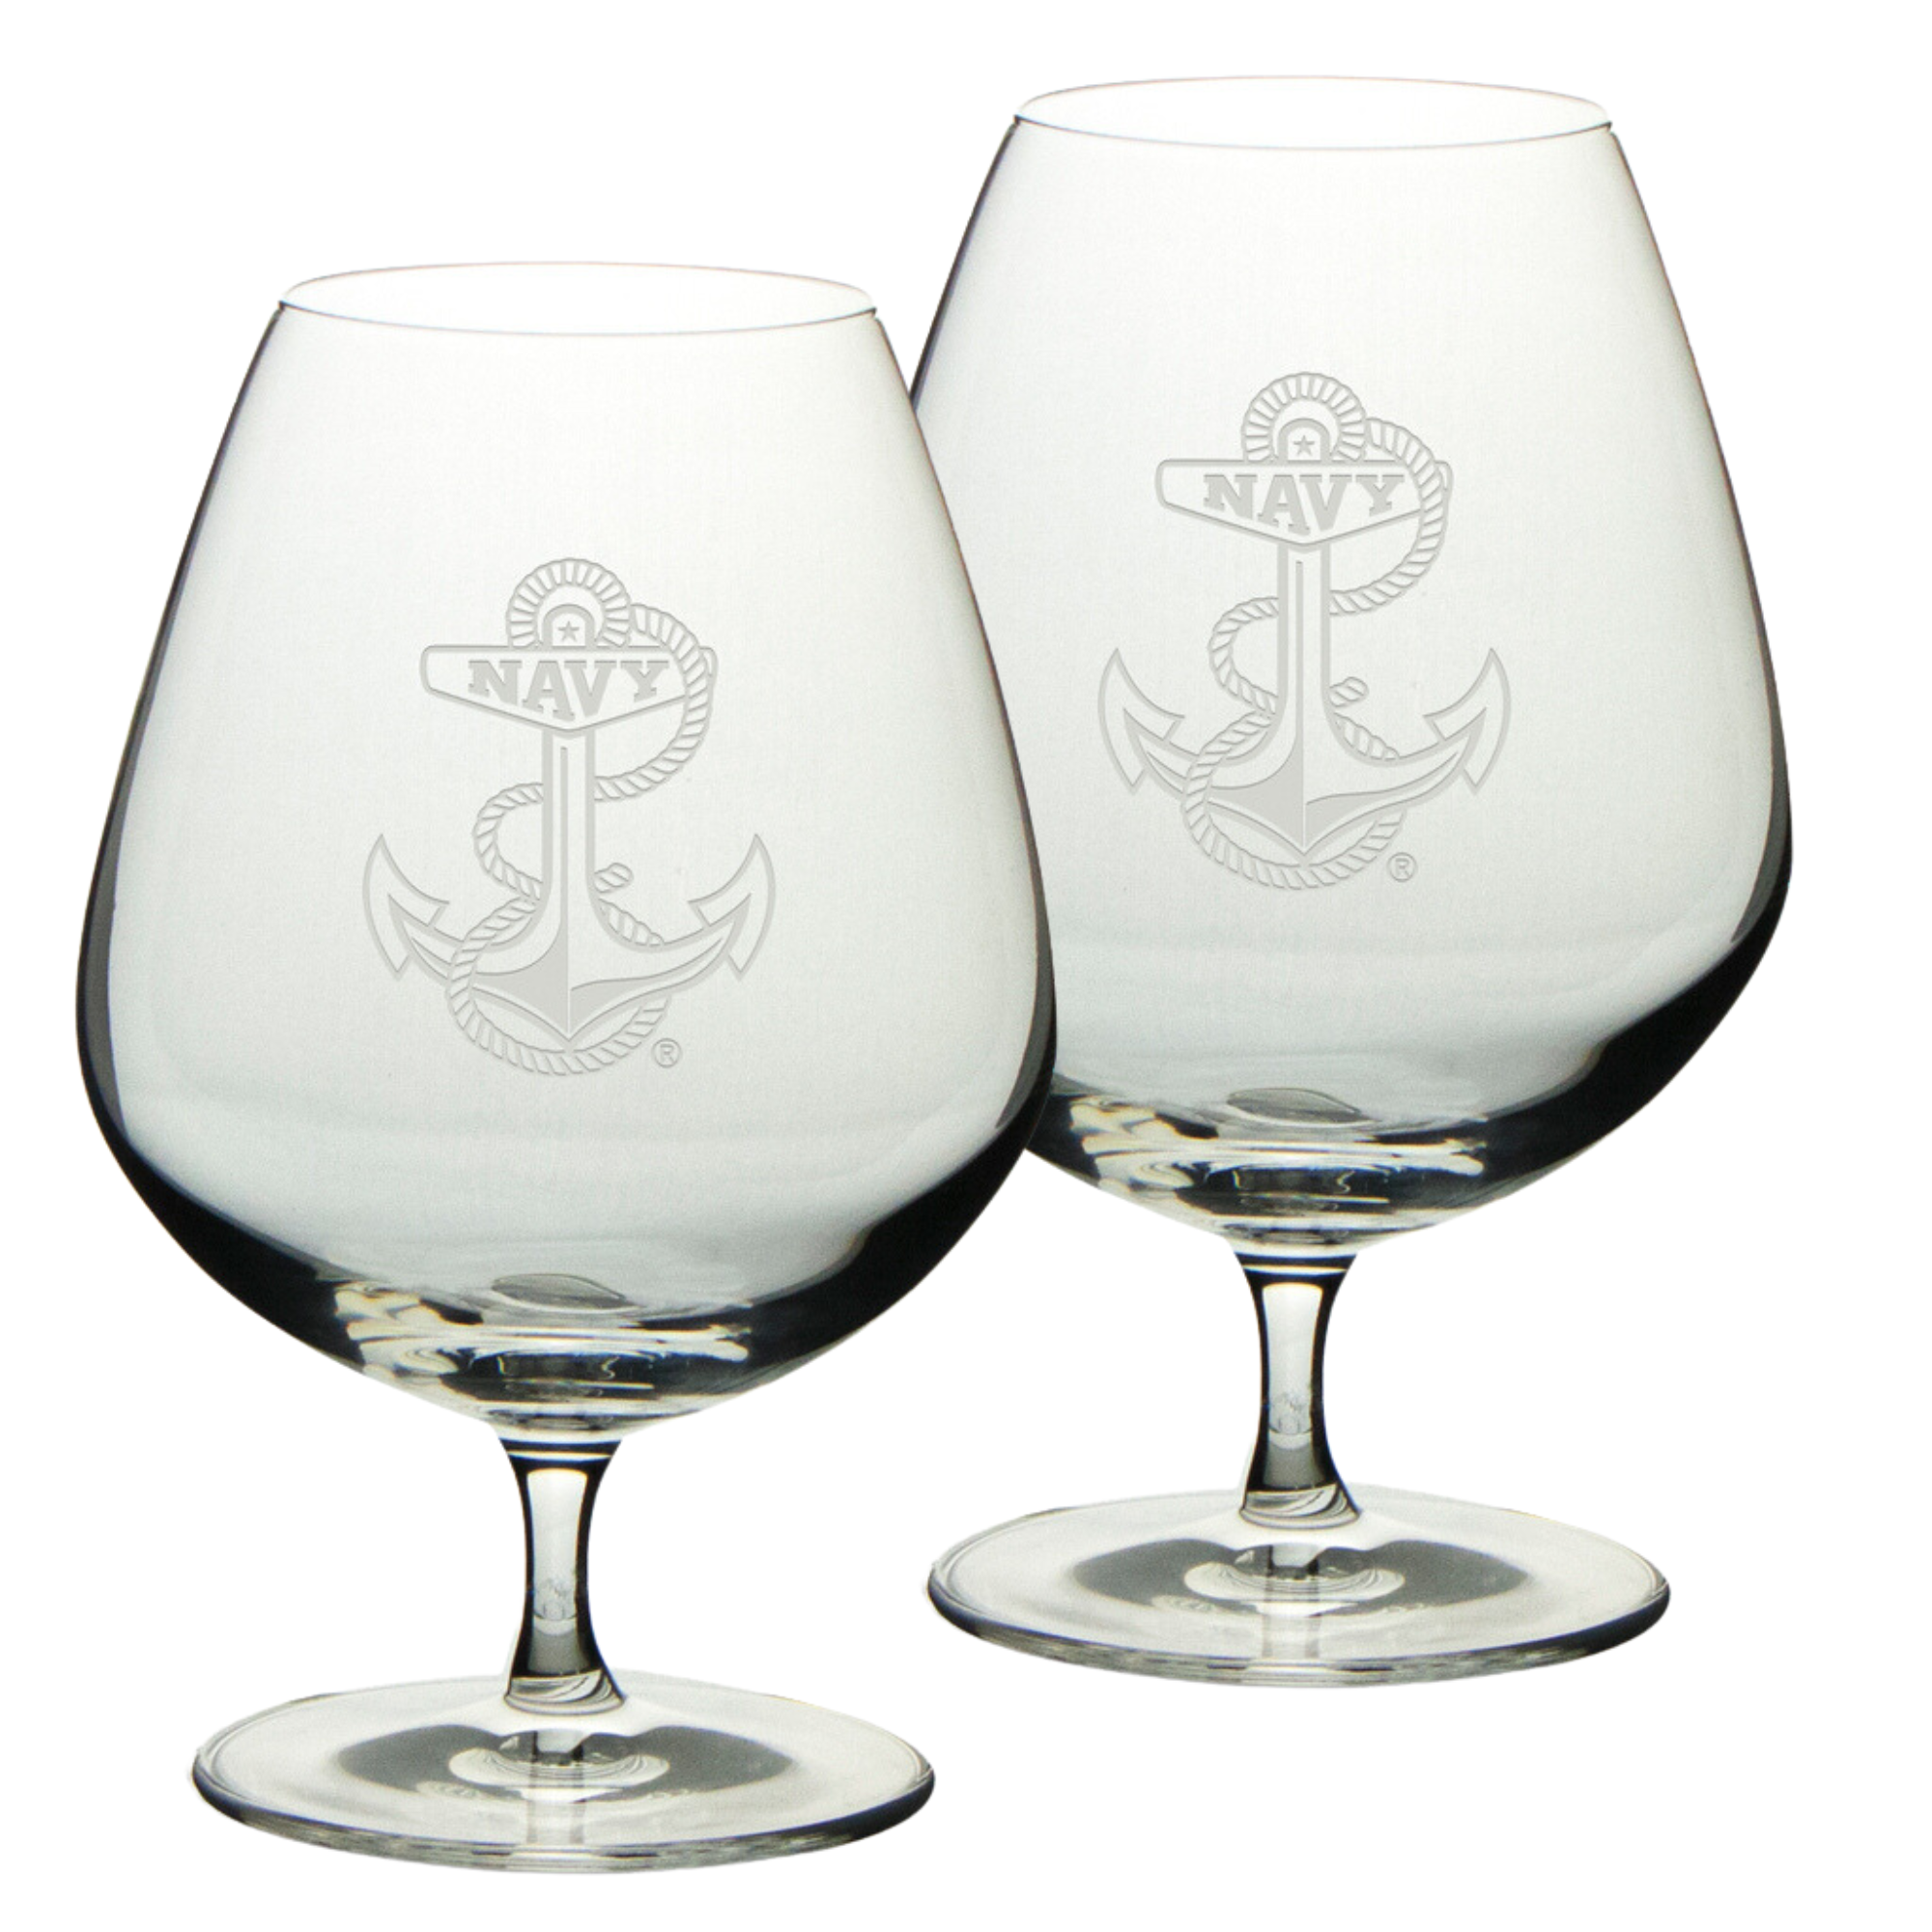 Navy Anchor Set of Two 21oz Brandy Snifter Glasses